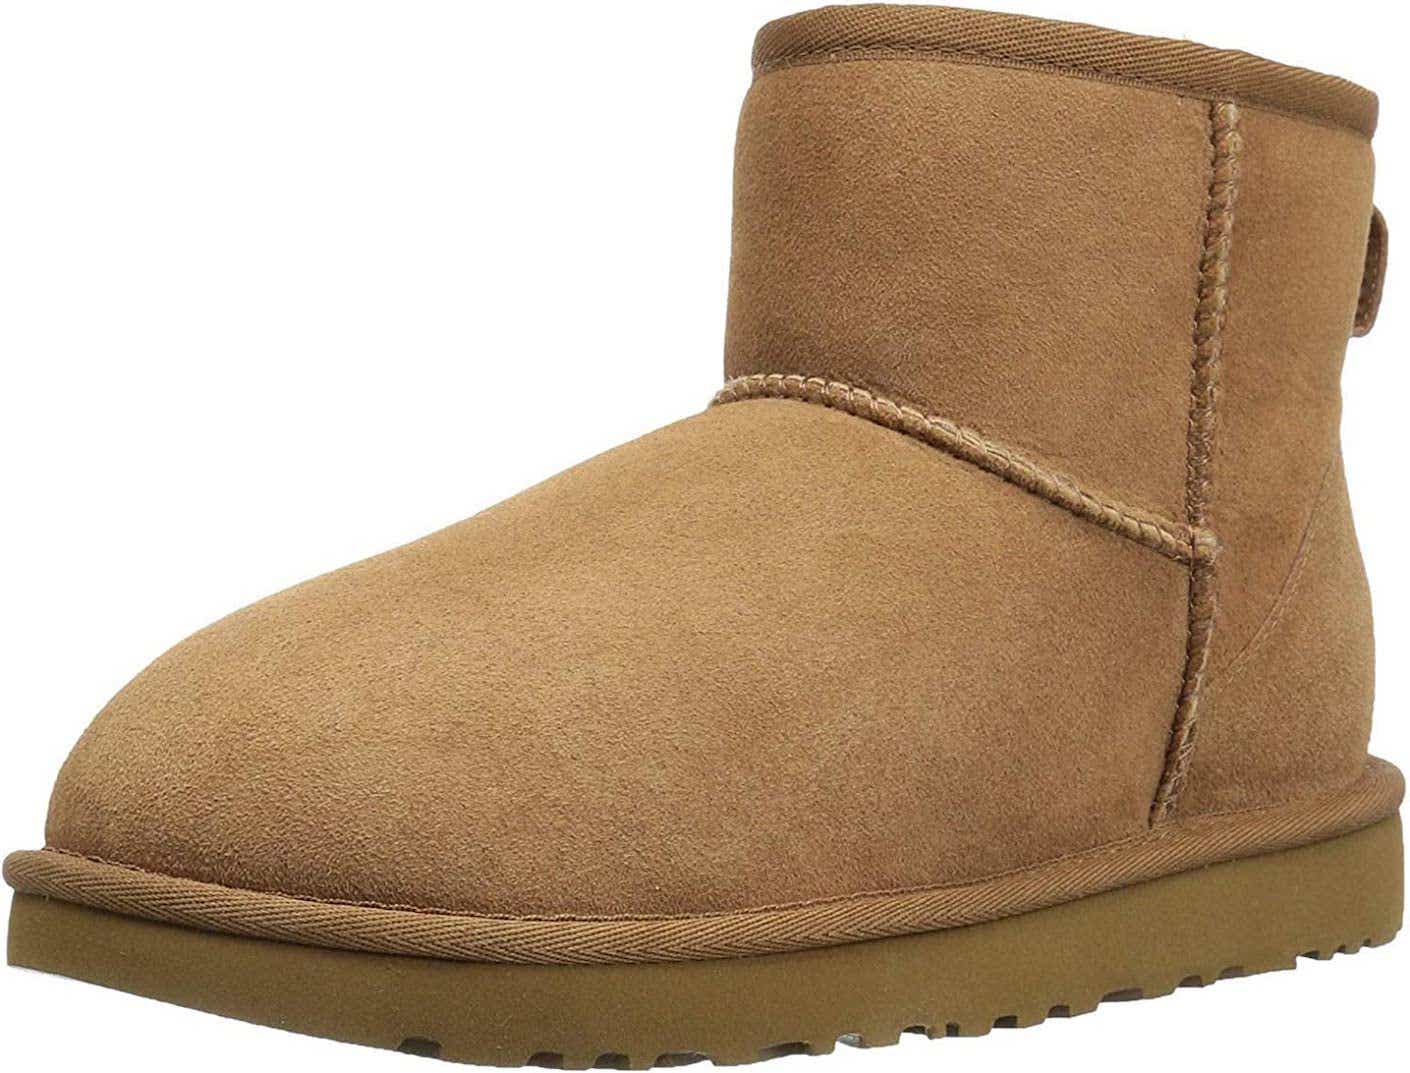 An image of a brown ugg